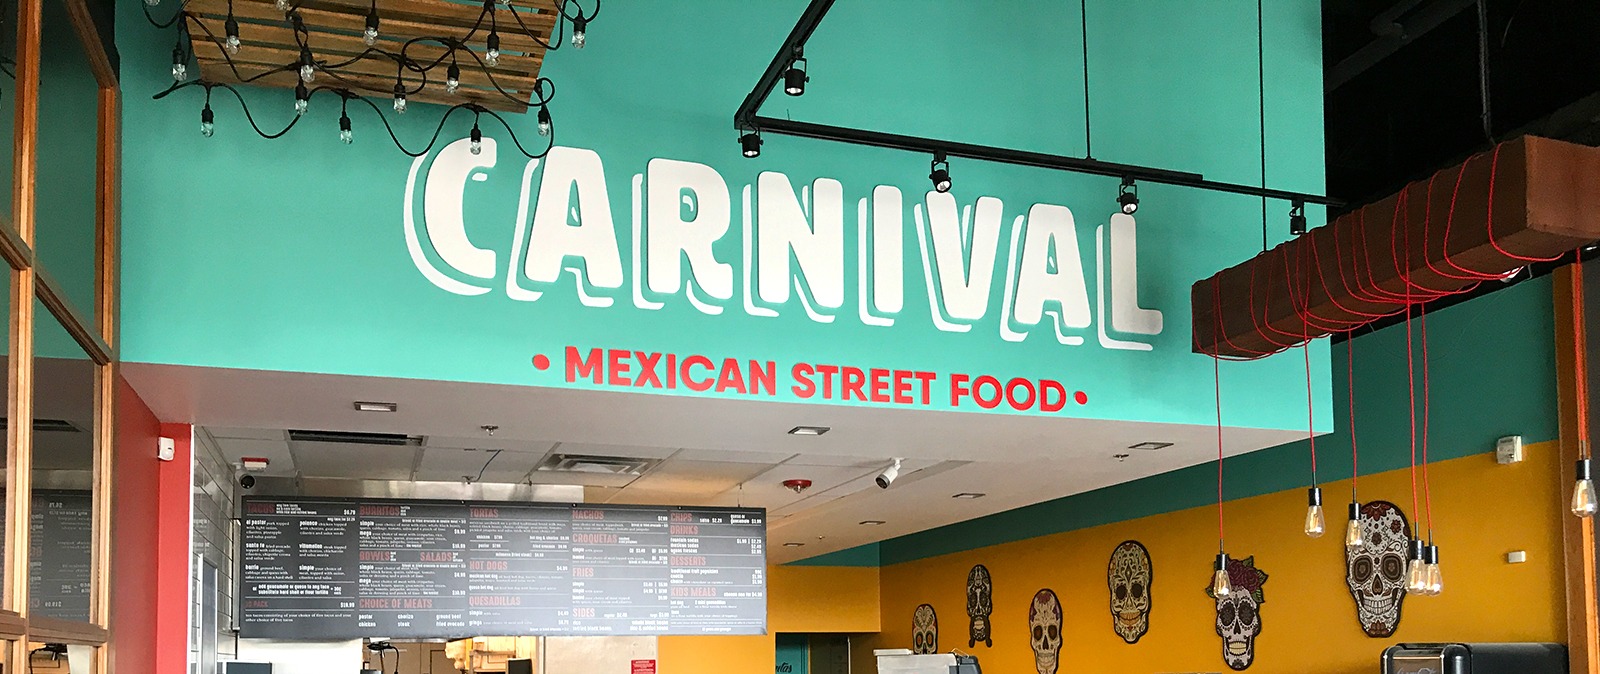 Carnival Mexican Street Food Graphic Restauant Header